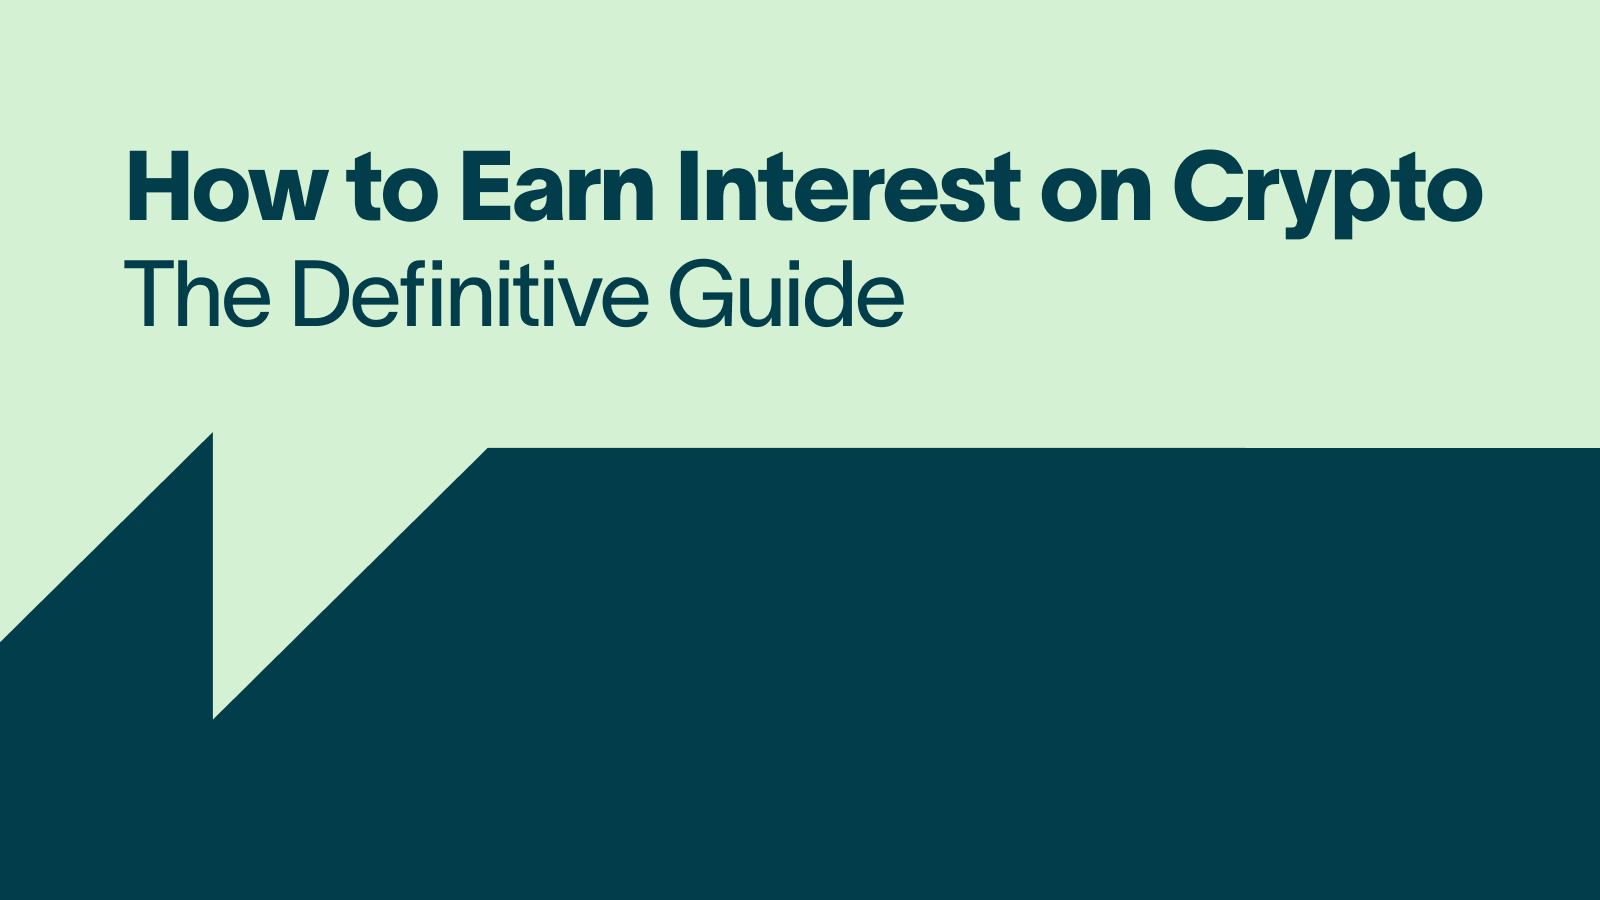 How to Earn Interest on Crypto (1)